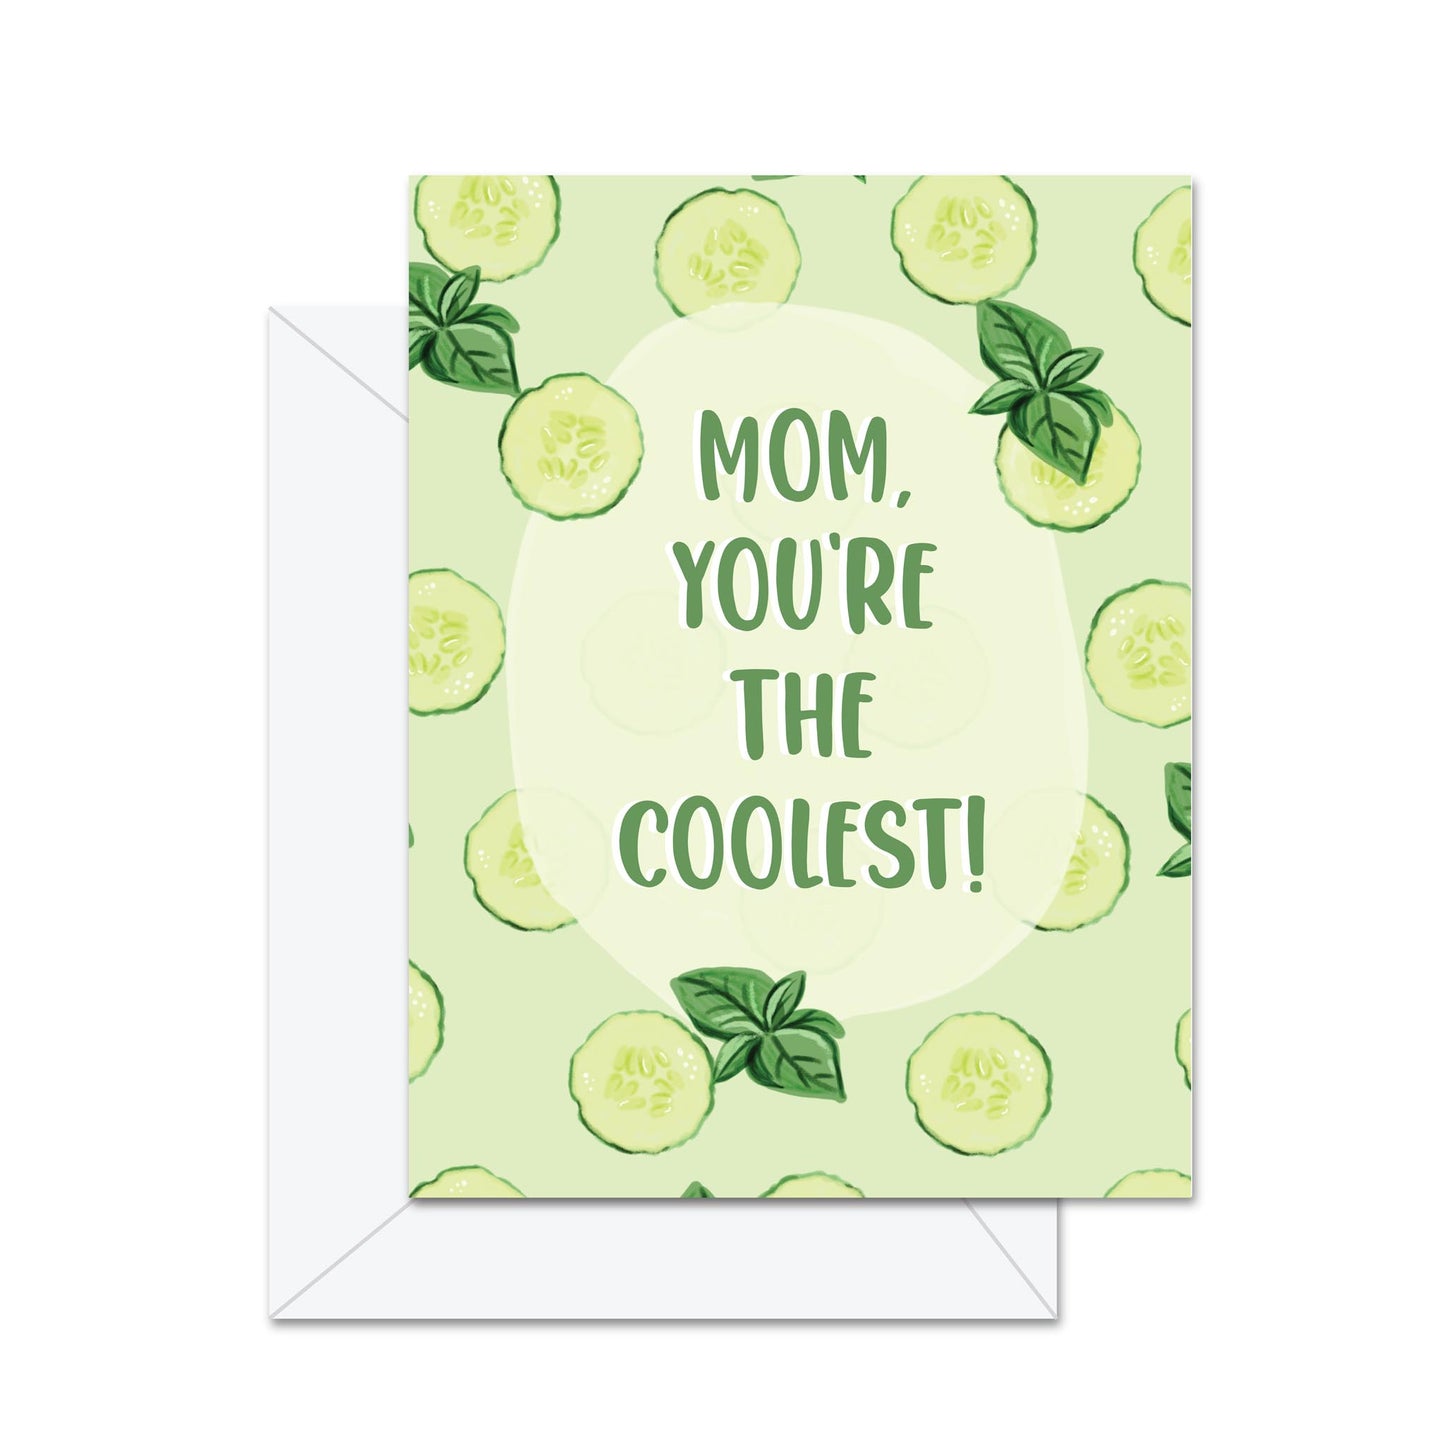 Mom, You're The Coolest! - Greeting Card